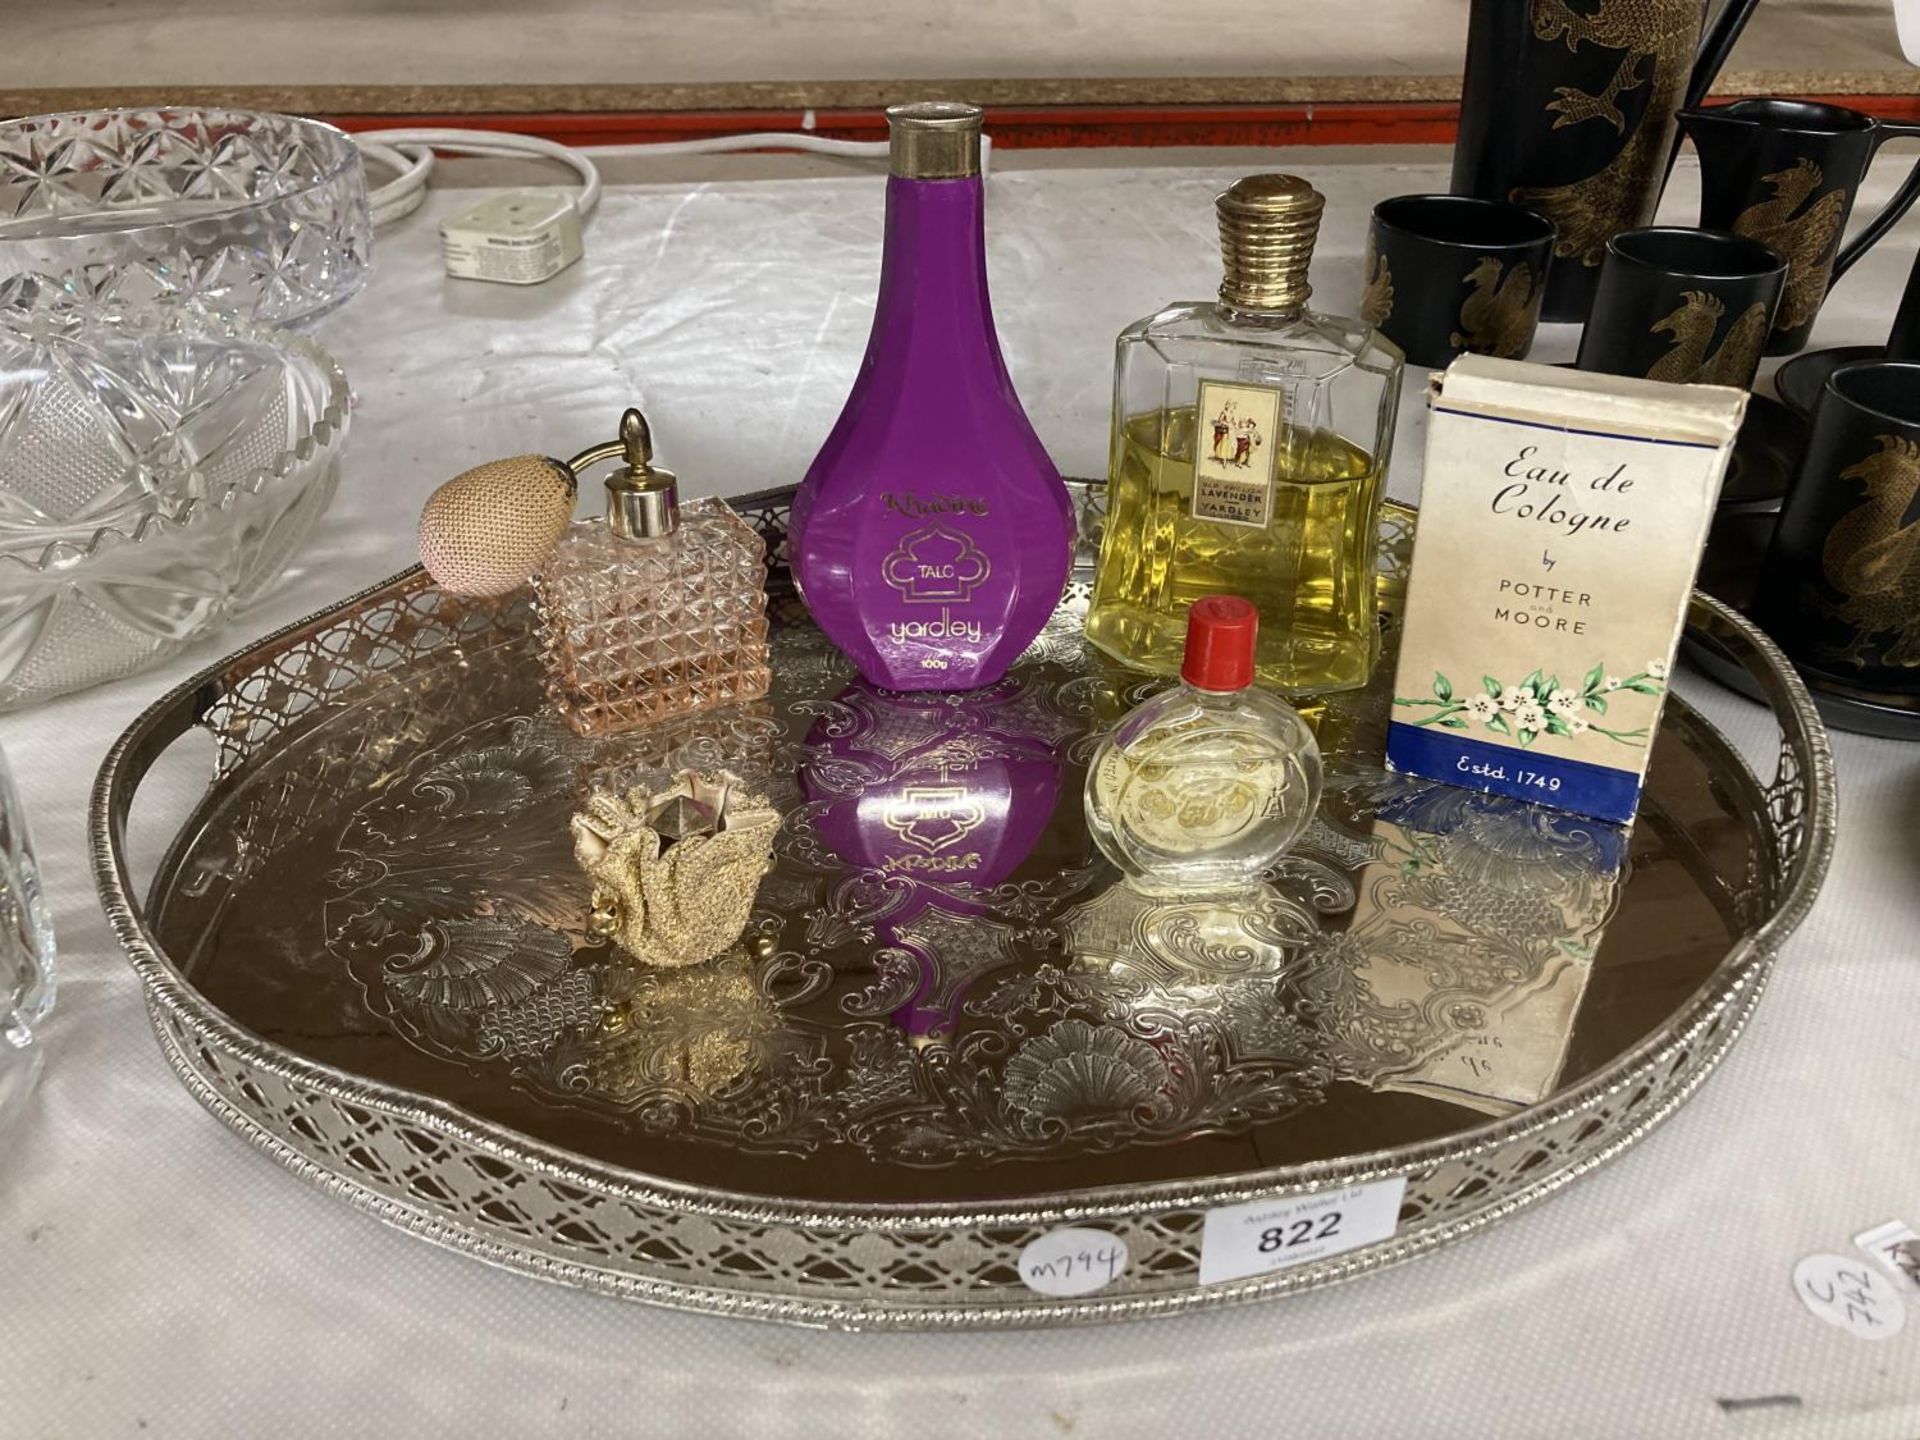 A SILVER PLATED GALLERIED TRAY CONTAINING VINTAGE PERFUMES, TALC AND A SCENT BOTTLE